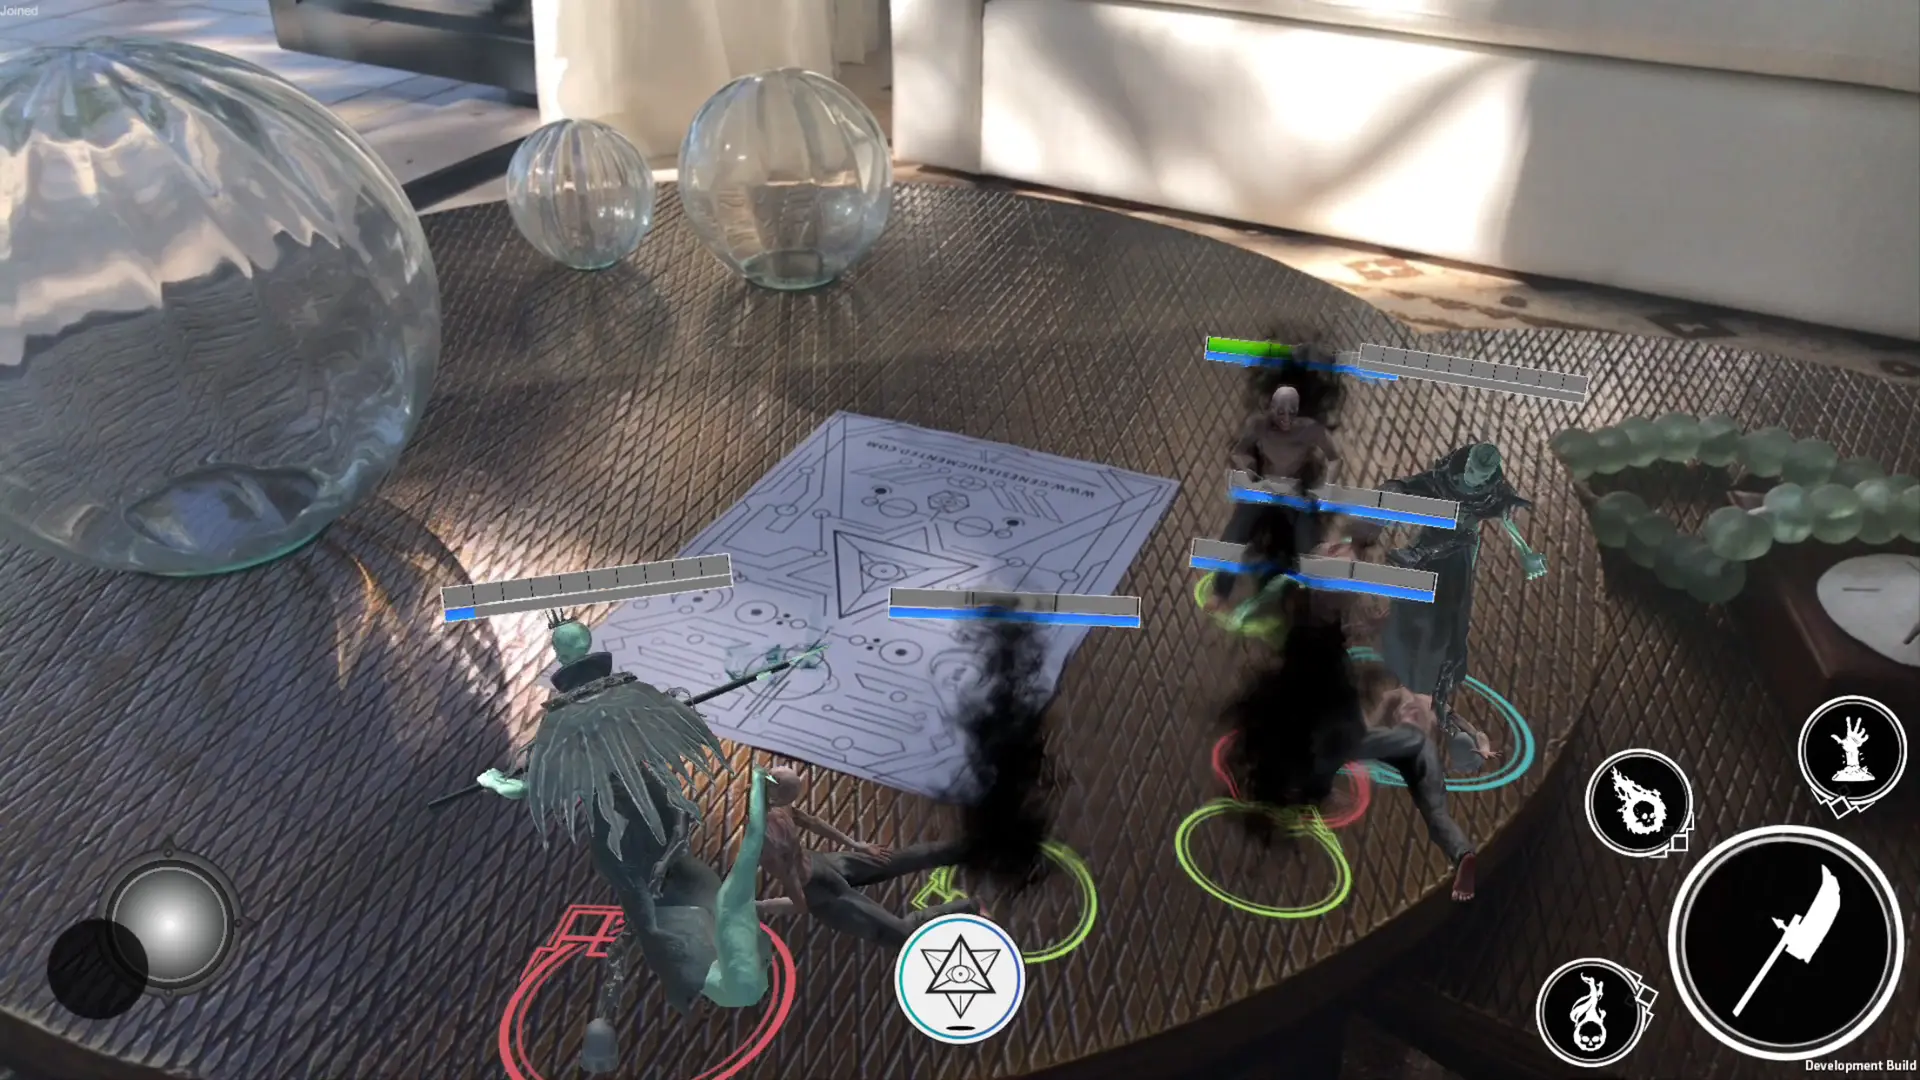 Two Barons from the Genesis AR TCG (Augmented Reality Trading Card Game) fighting on a tabletop